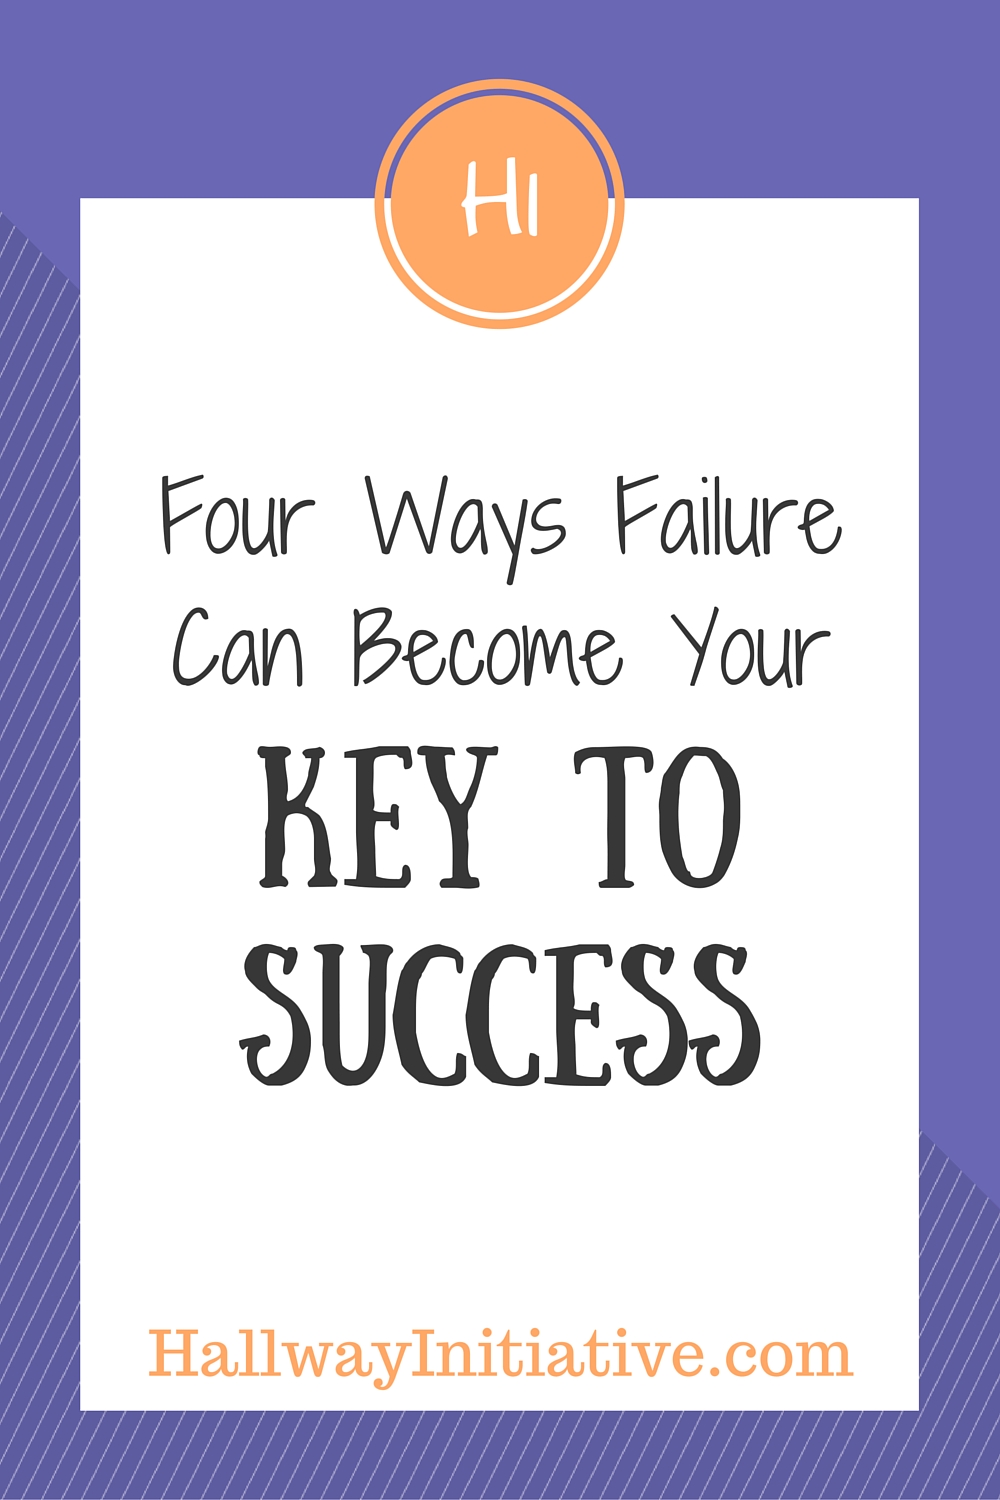 4 ways failure can become your key to success